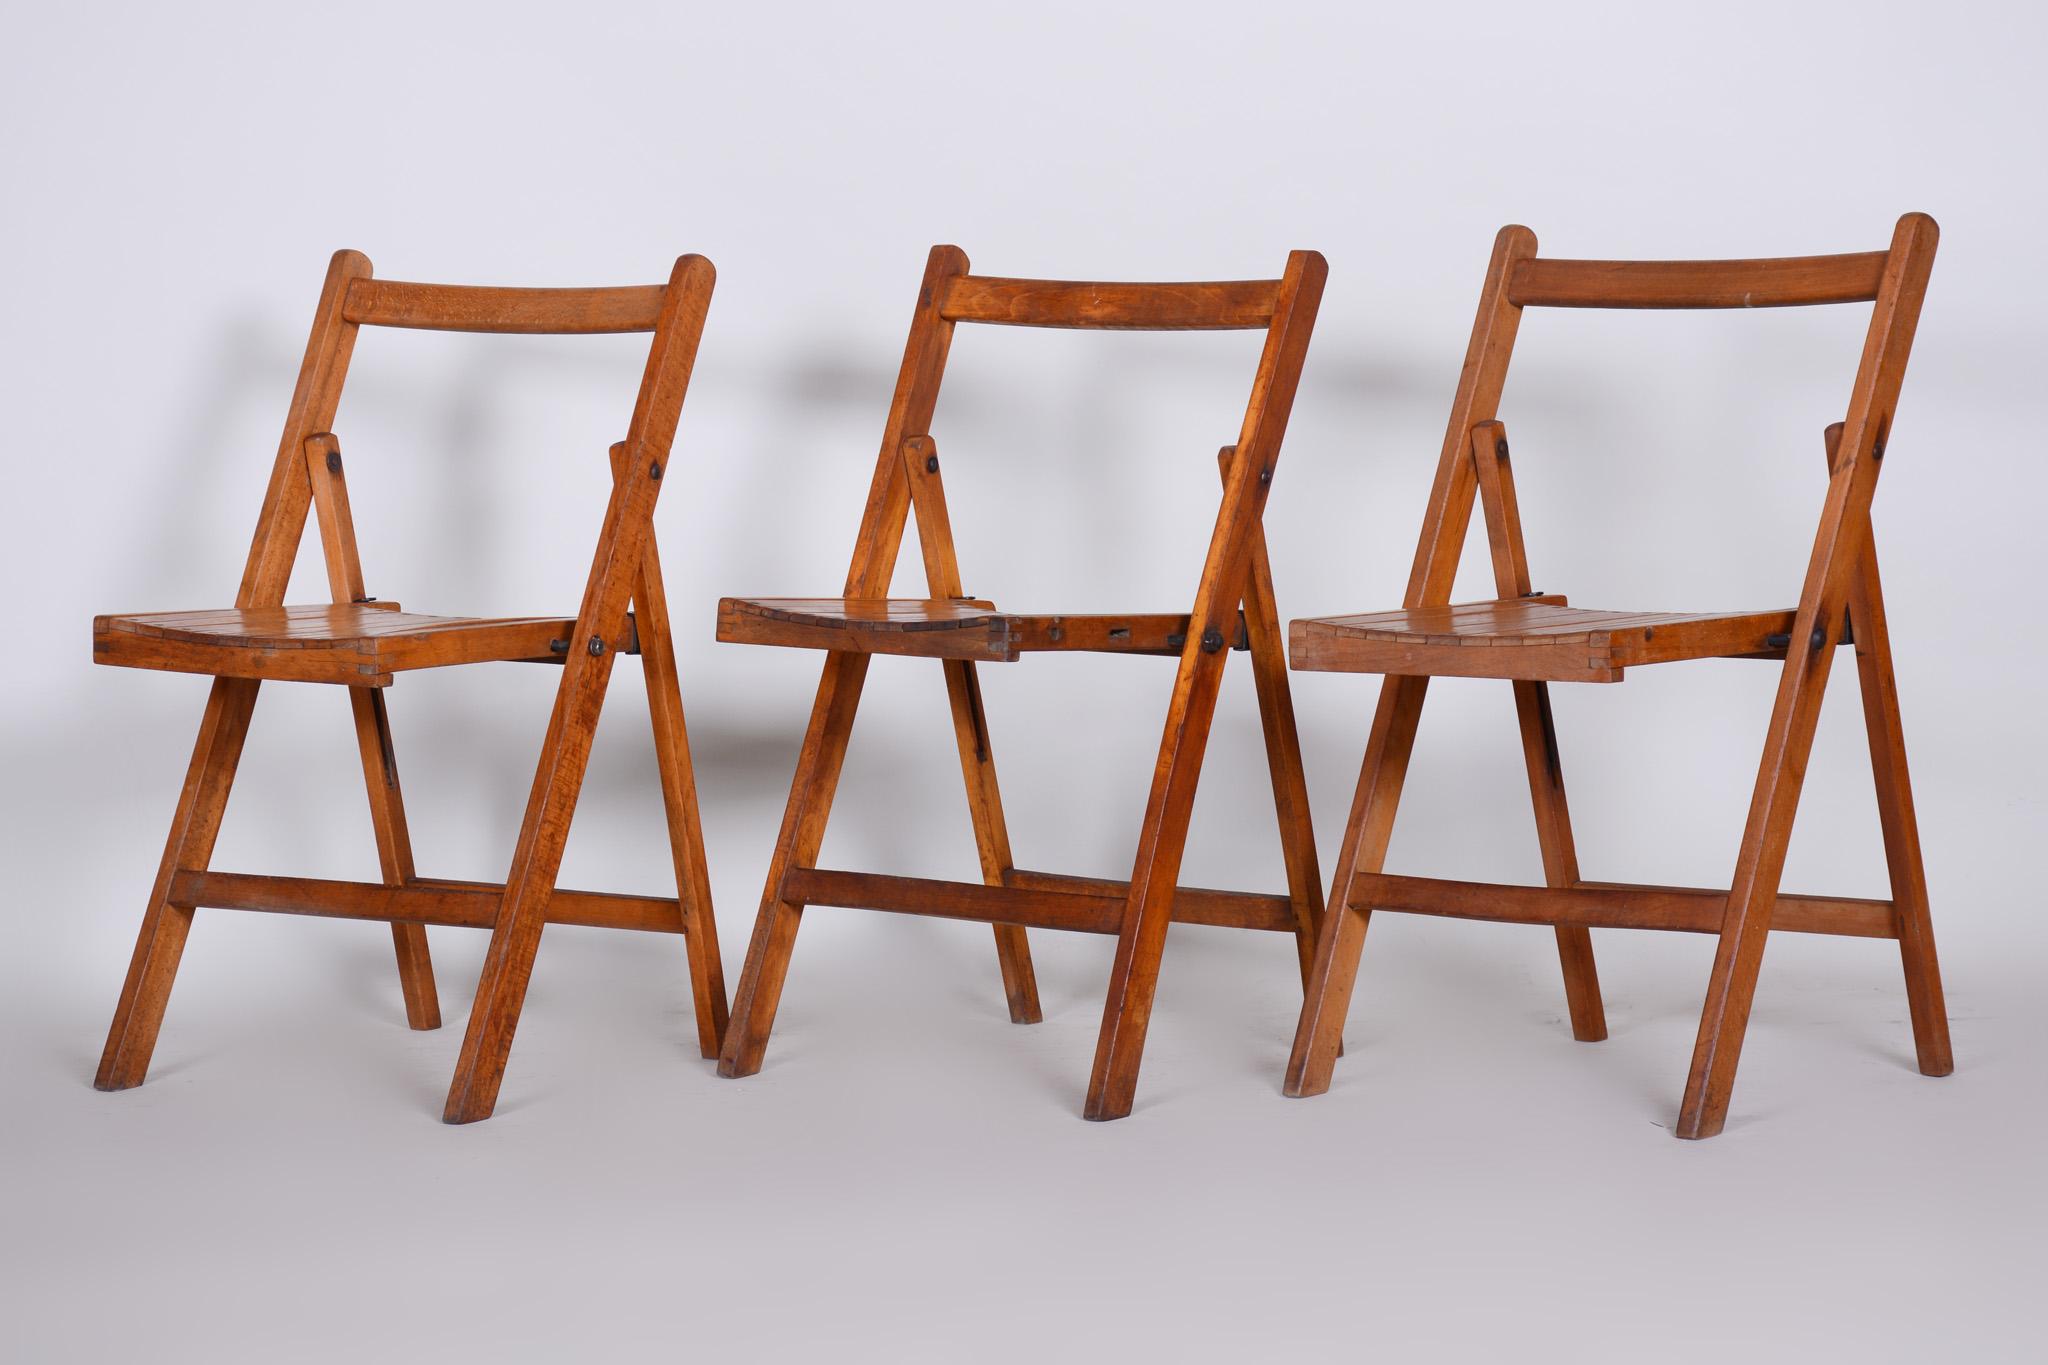 Czech Midcentury Beech Chairs, Original Condition, 1950s, 3 Pieces For Sale 7